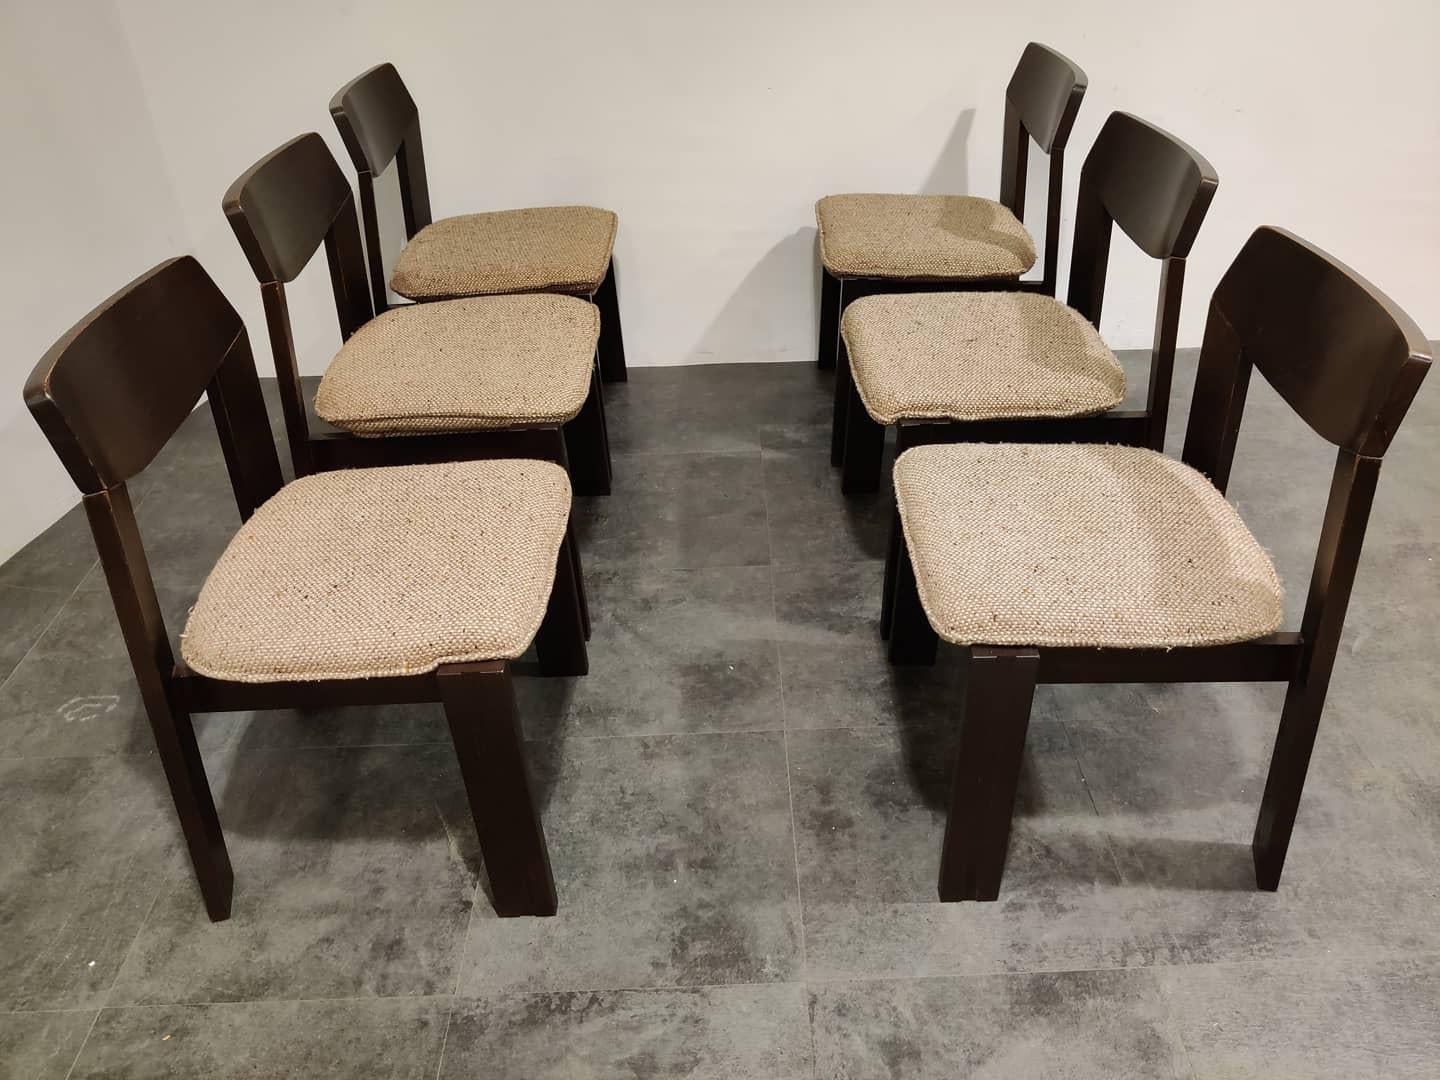 Midcentury Brutalist dining chairs with their original thick grey fabric cushions/upholstery.

Very sturdy chairs with a nice design.

Good original condition.

1960s - Germany

Dimensions:
Height 80cm/31.49